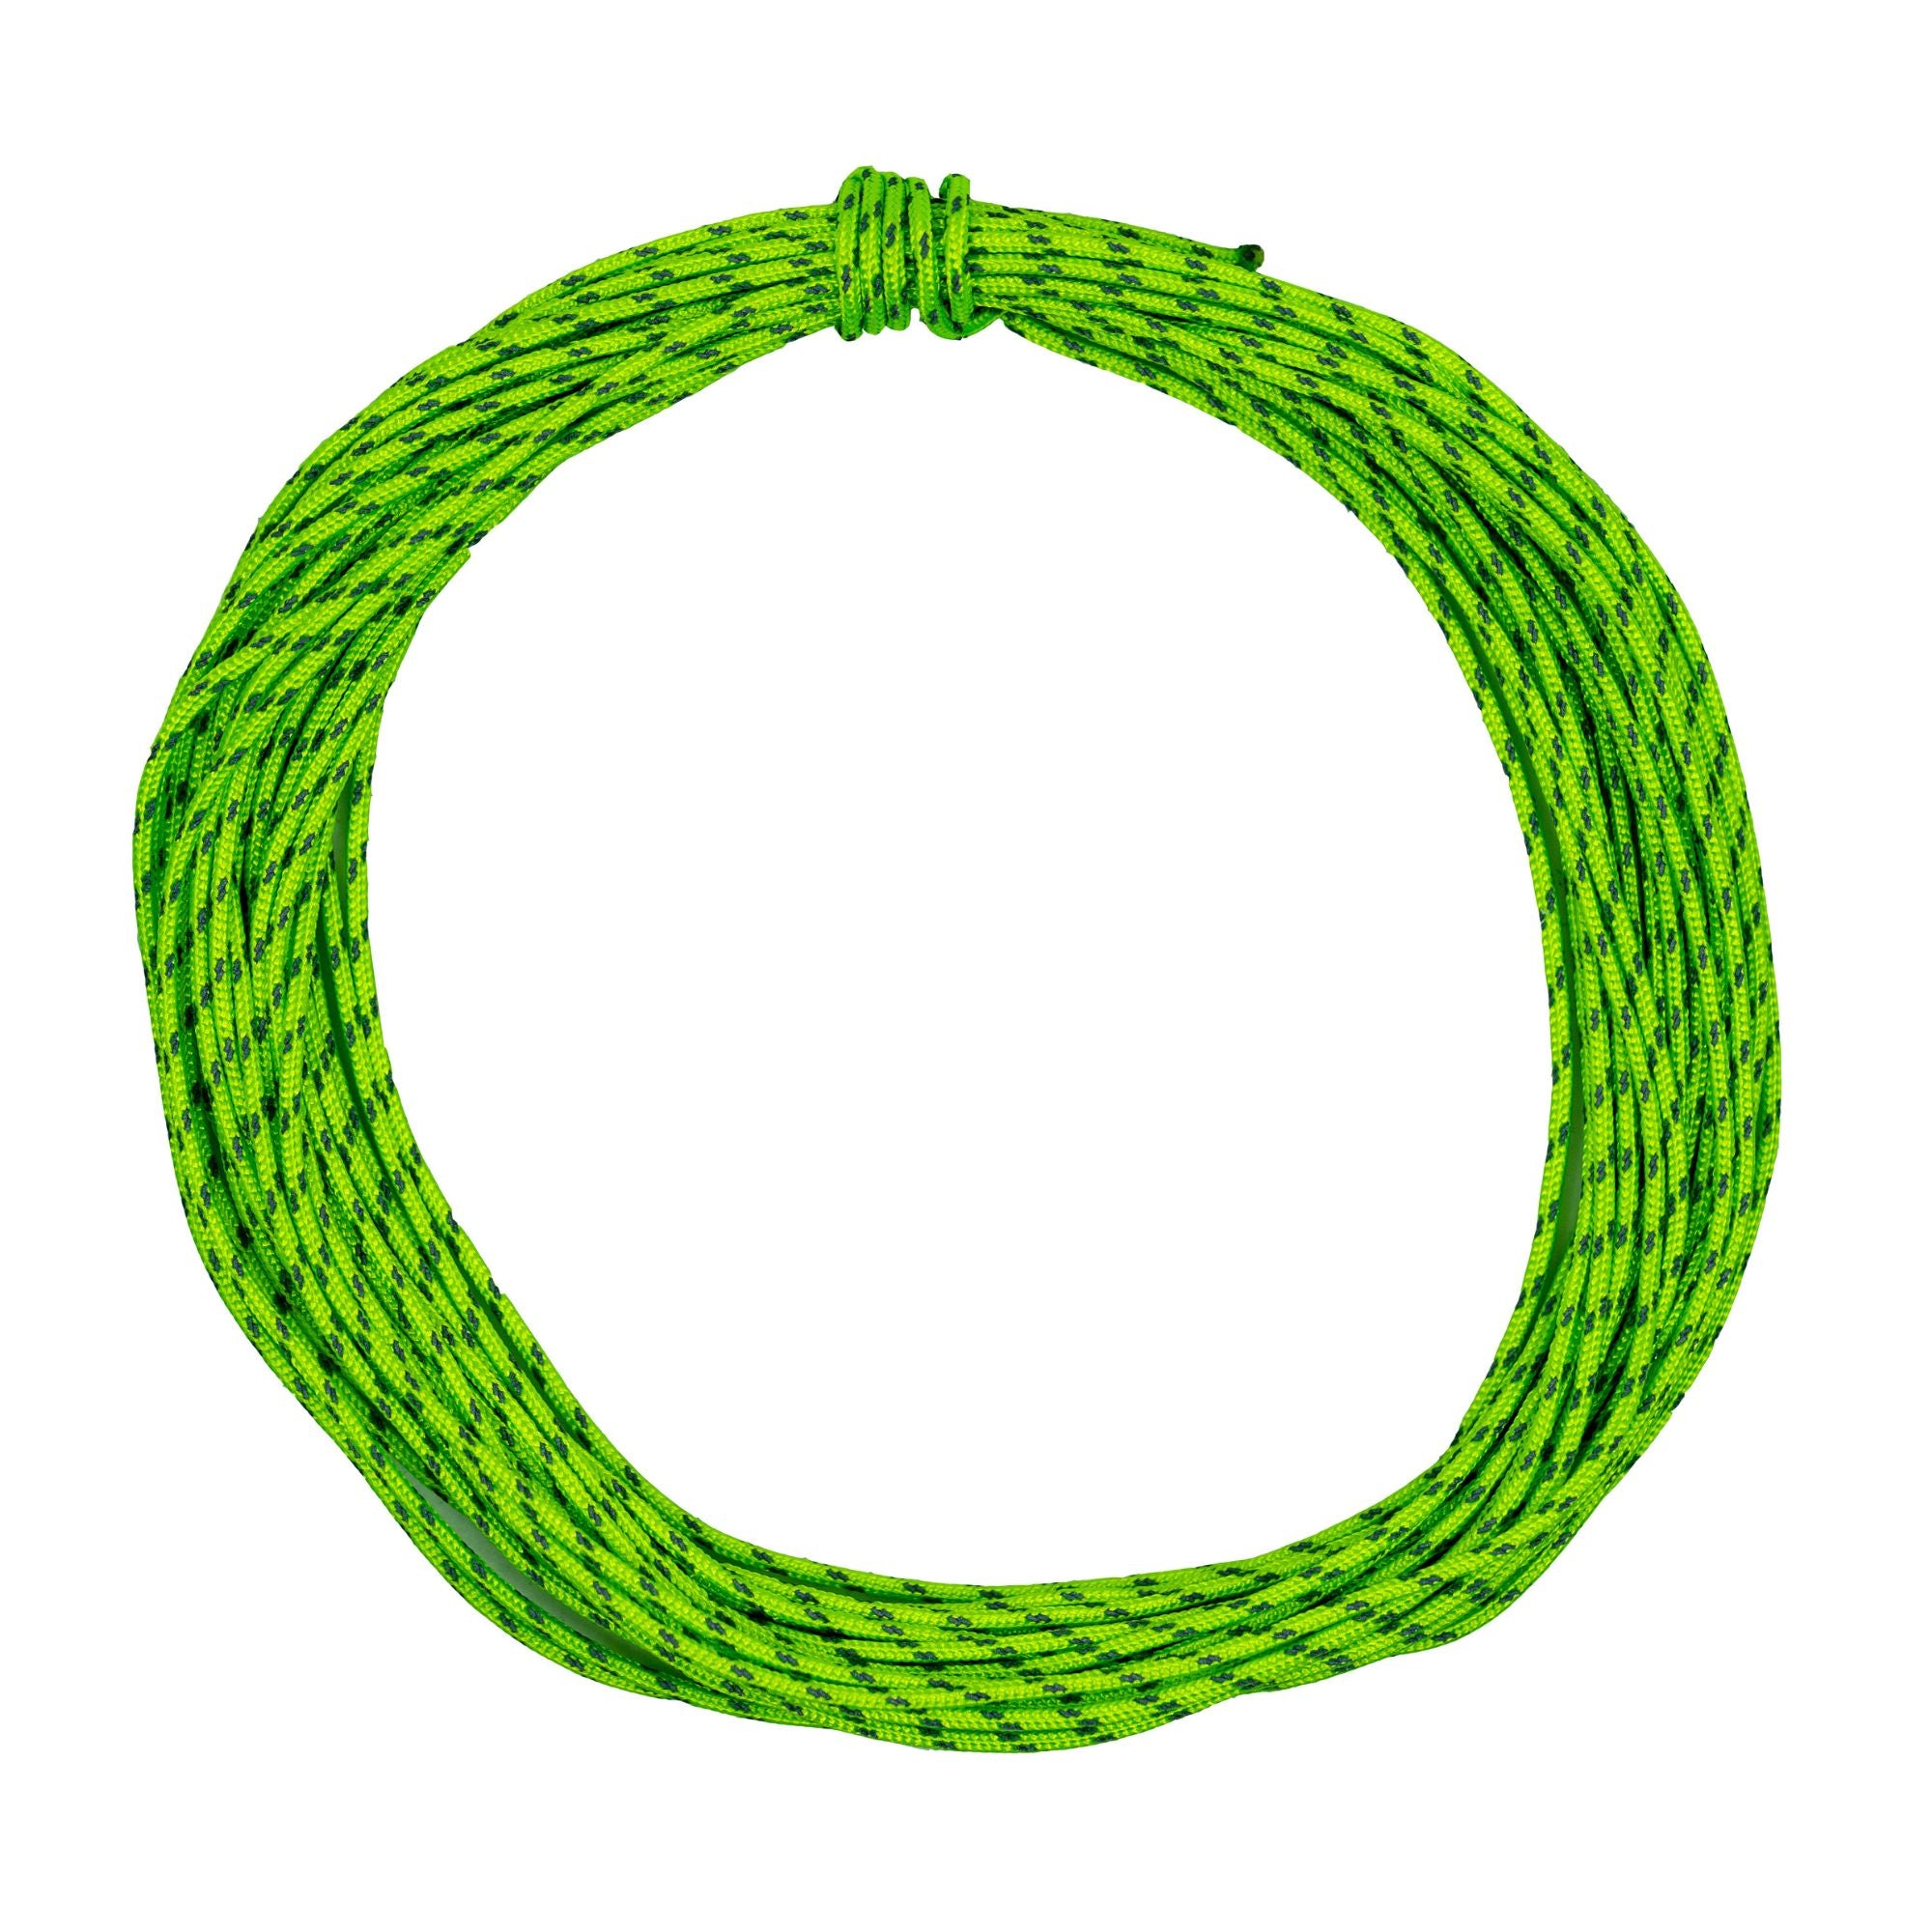 1.5 mm Poly/UHMWPE Reflective Cord, Cordage for Bags, Tie-outs